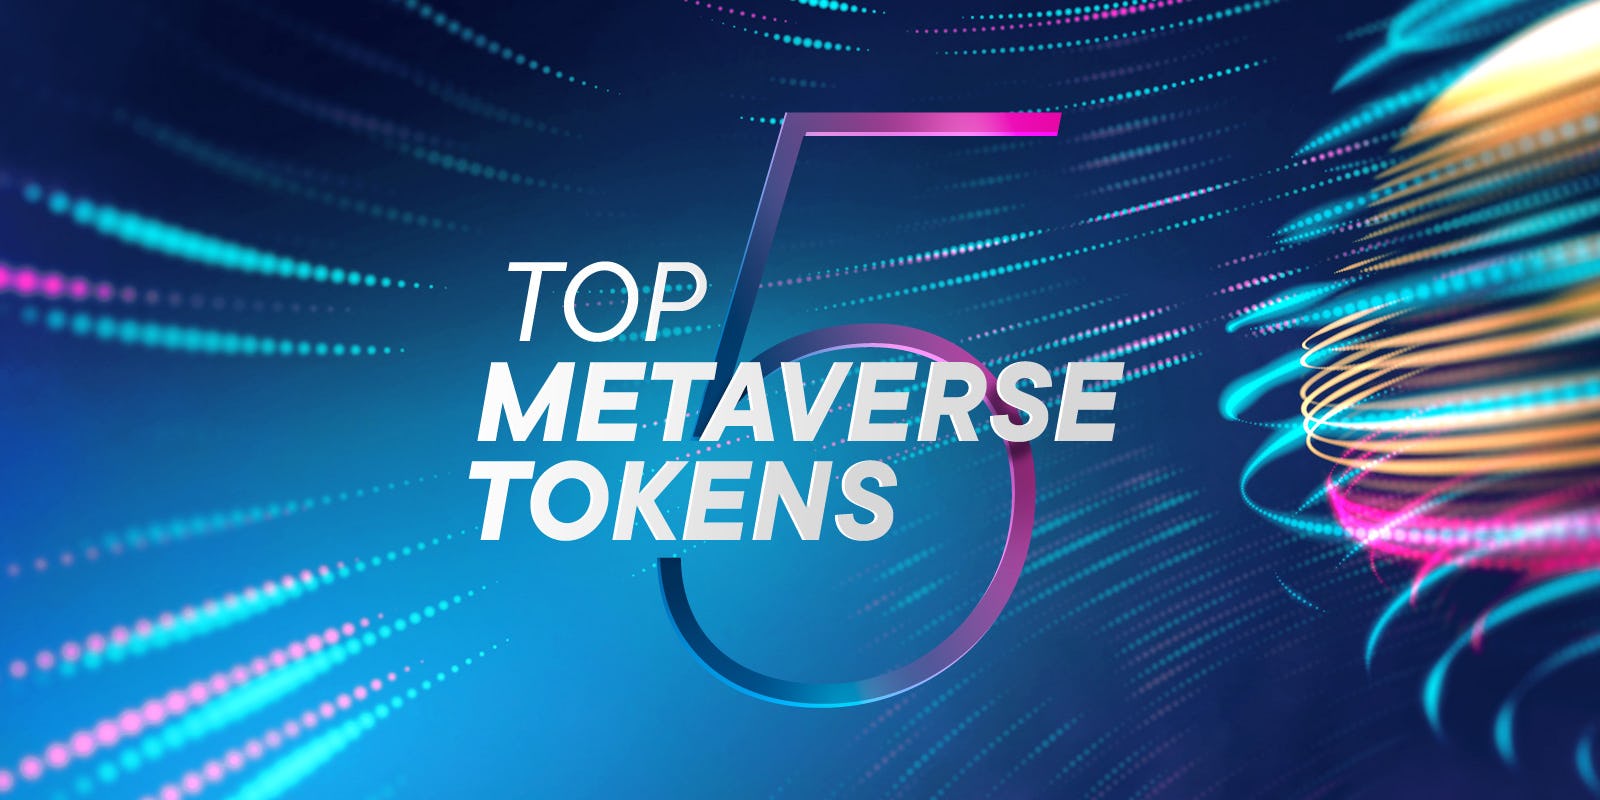 The top 5 Metaverse tokens avaialble in the SwissBorg app